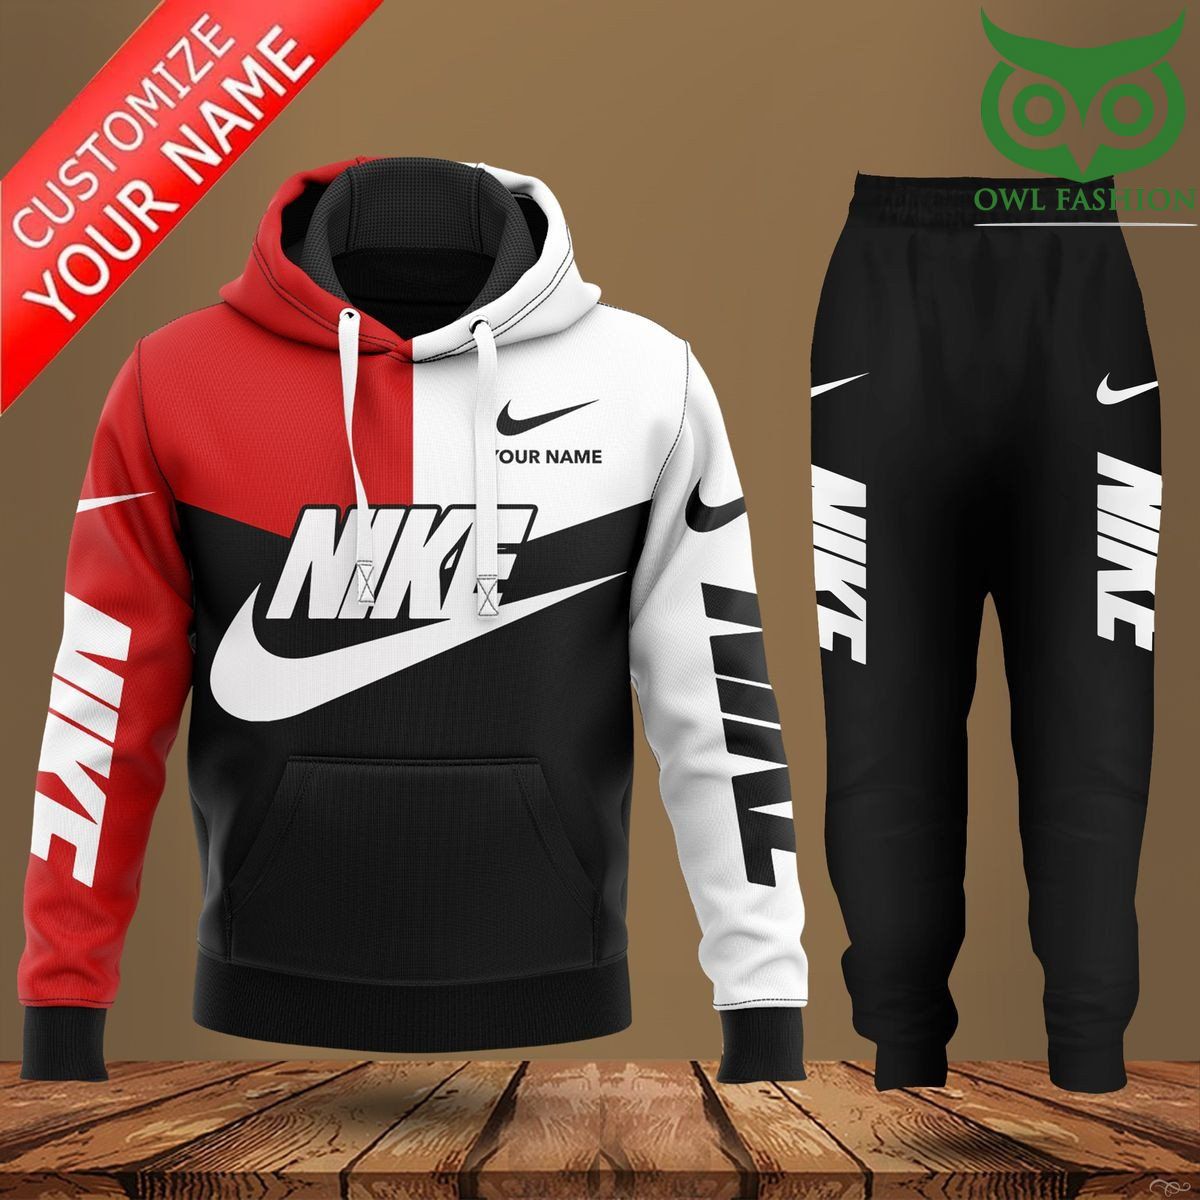 Nike black and red hoodies and sweatpants